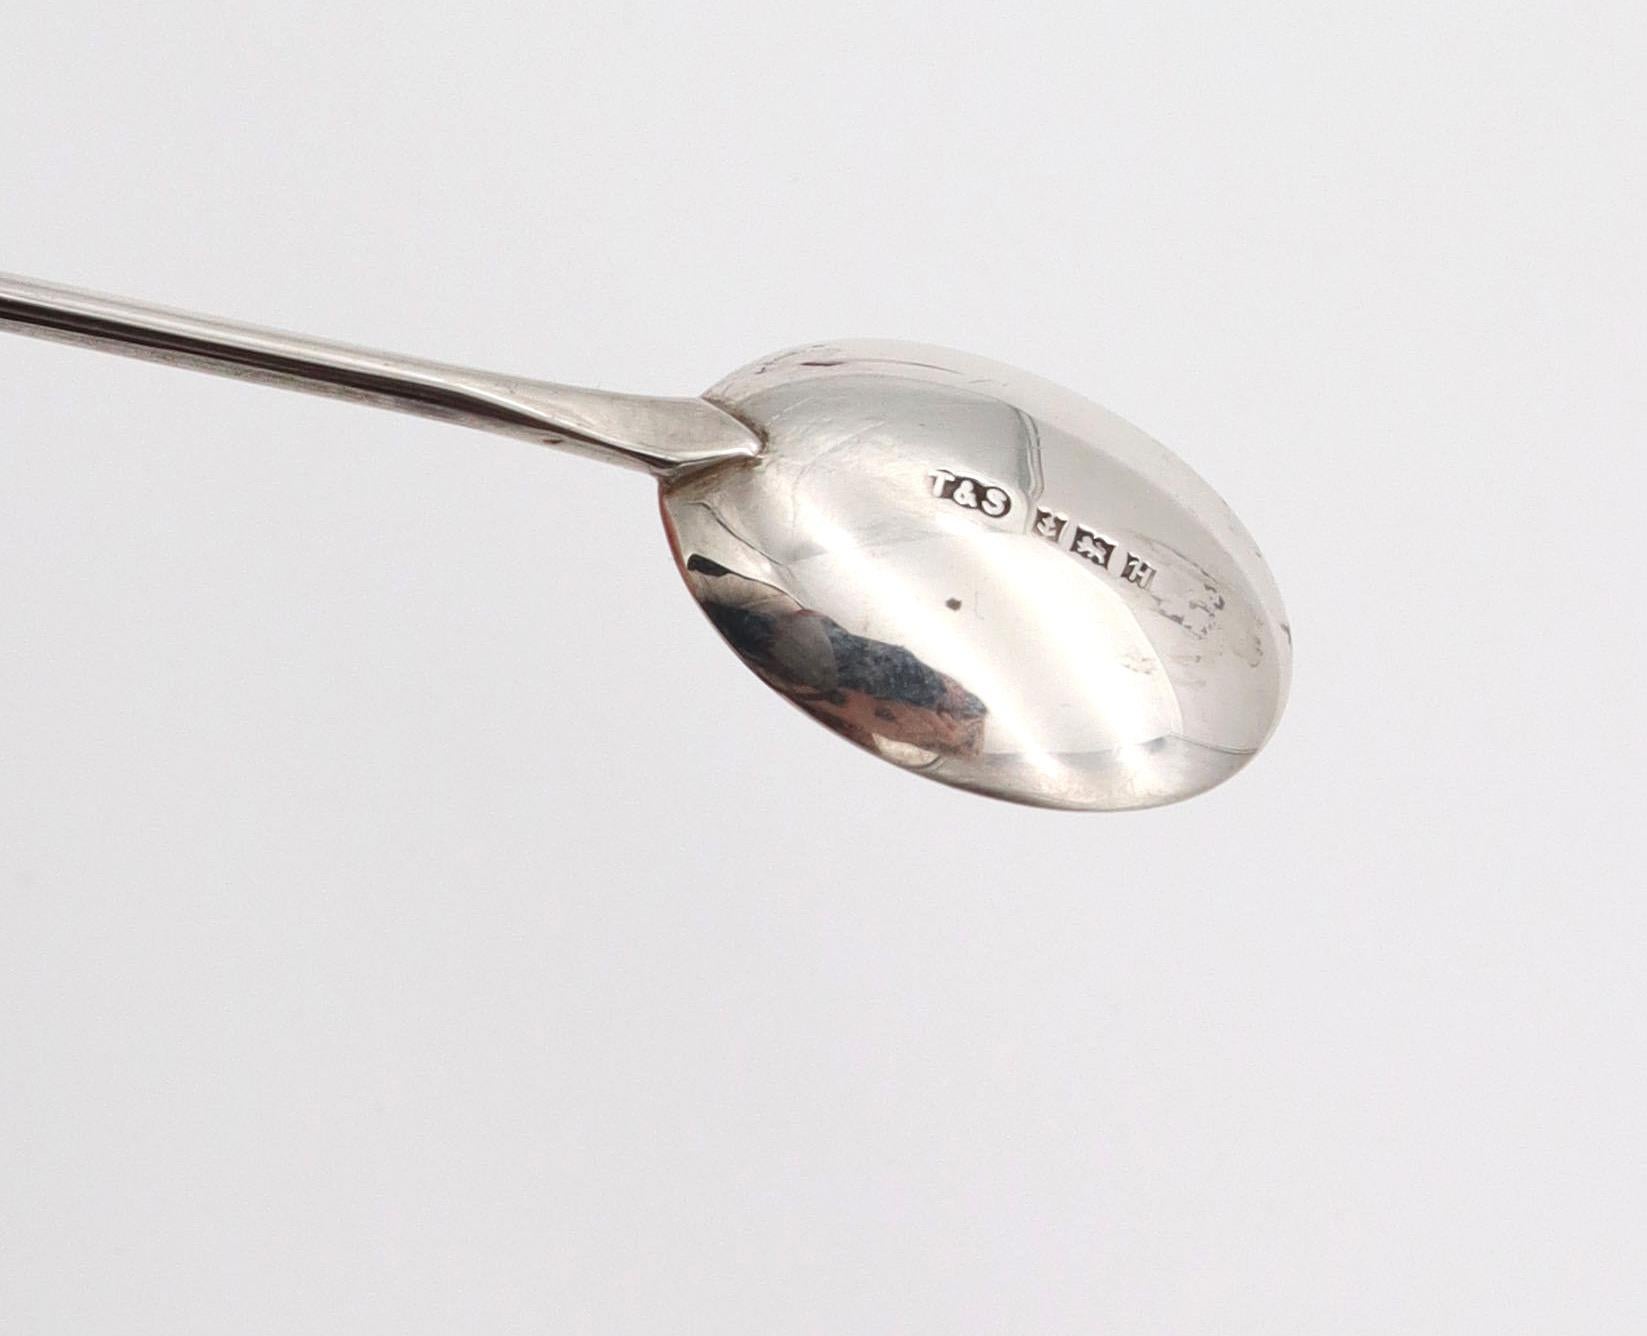 Sterling Silver Cocktail or Olives Forks and Spoon Made by the T.S. Company 1932 6